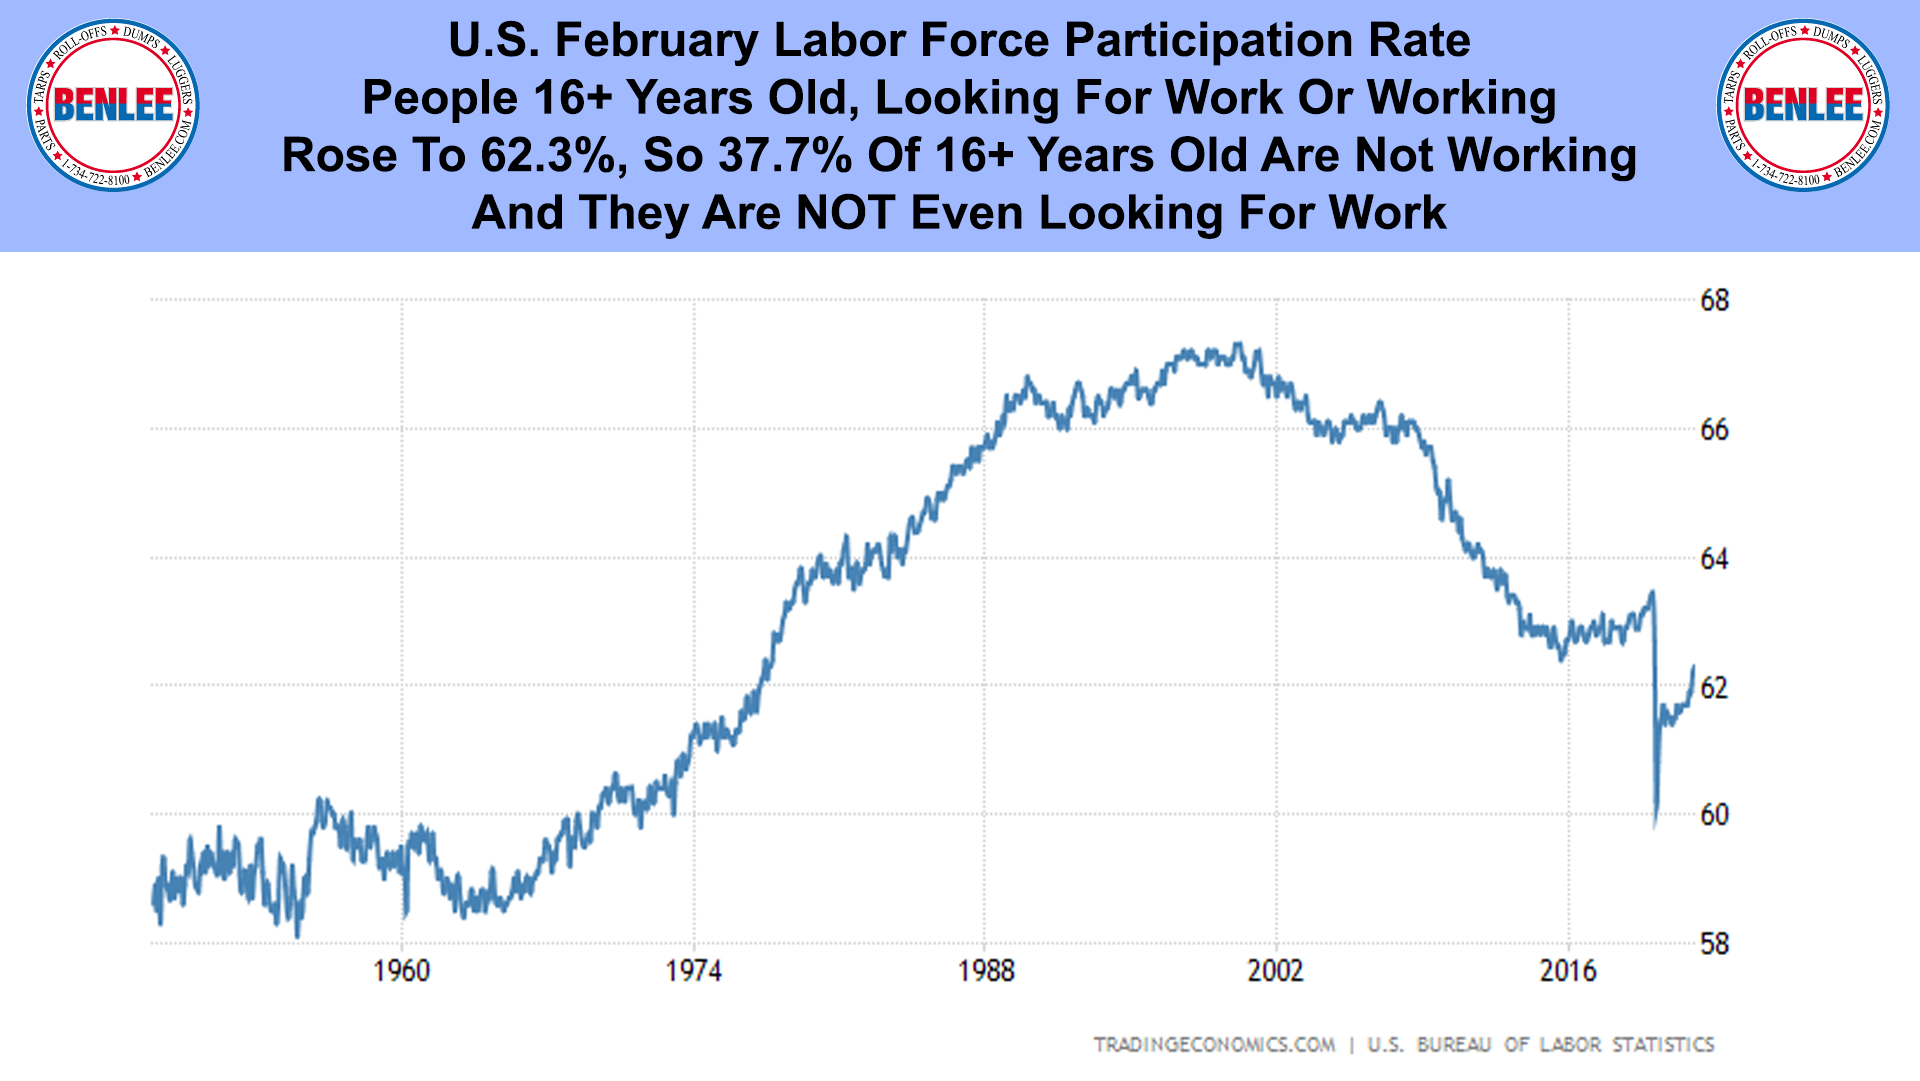 U.S. February Labor Force Participation Rate